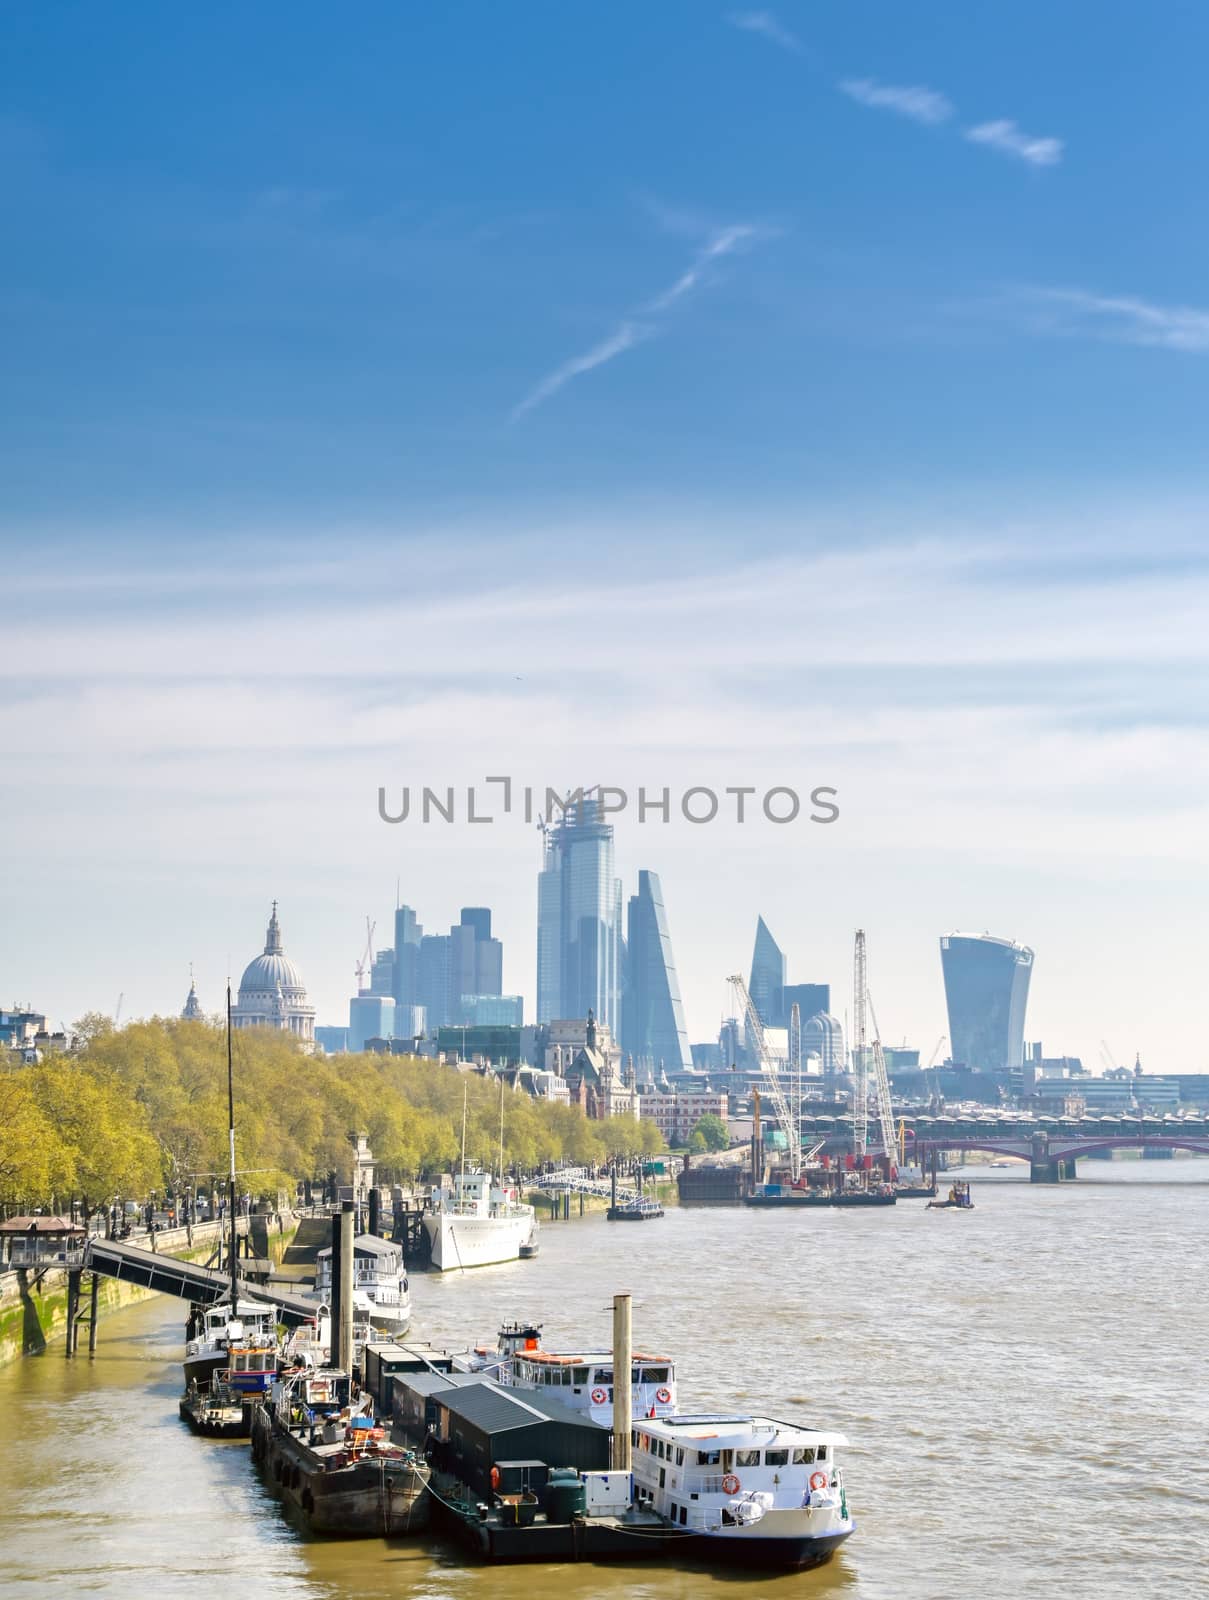 A view along the River Thames in London, UK by jbyard22